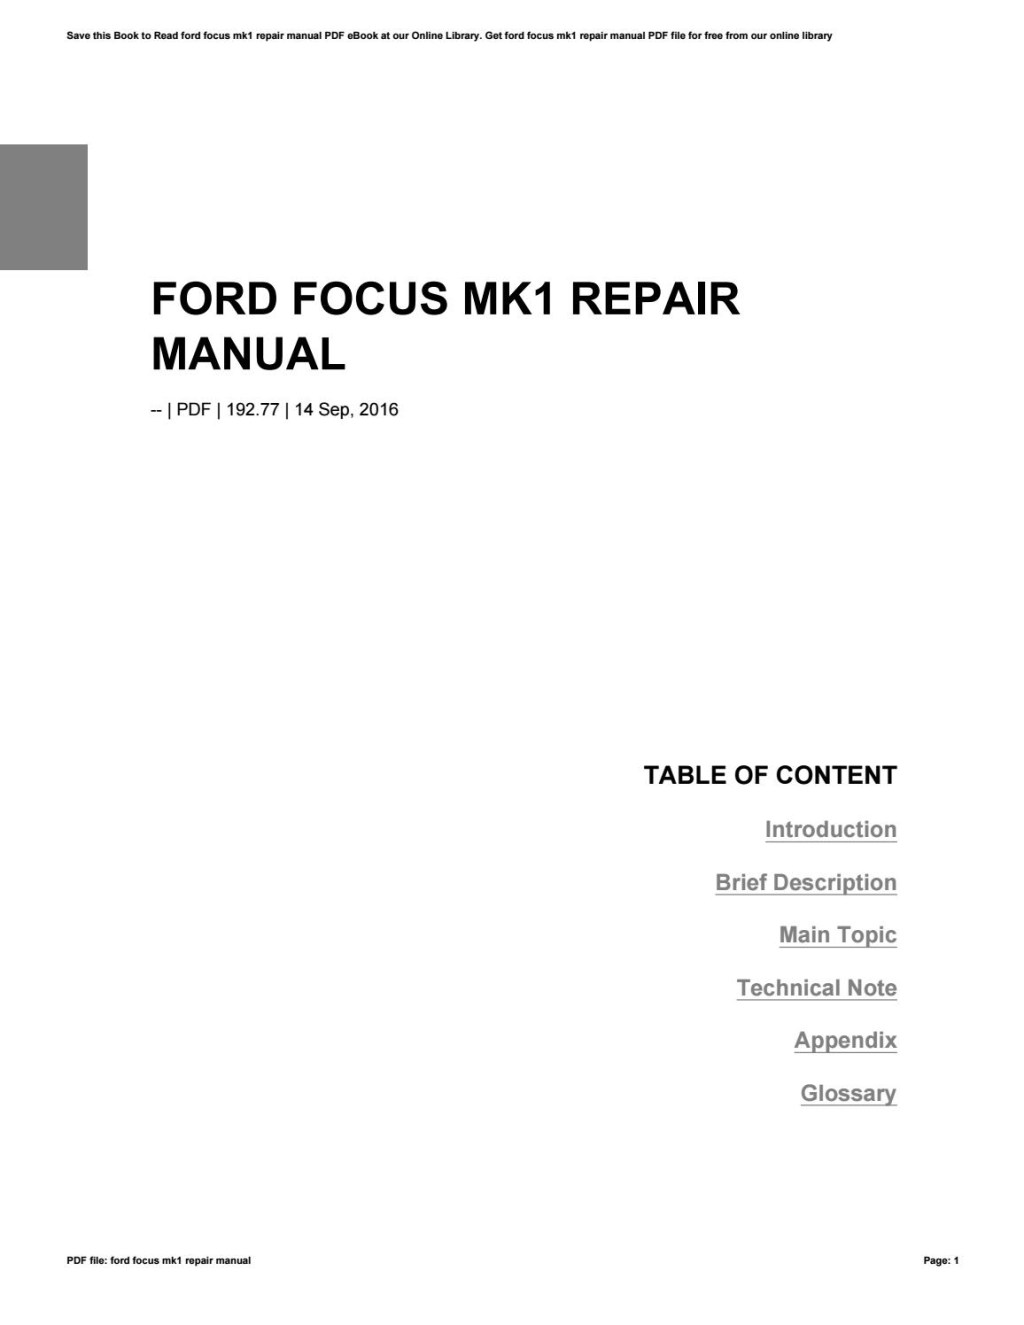 Picture of: Ford focus mk repair manual by jomanaserukia – Issuu